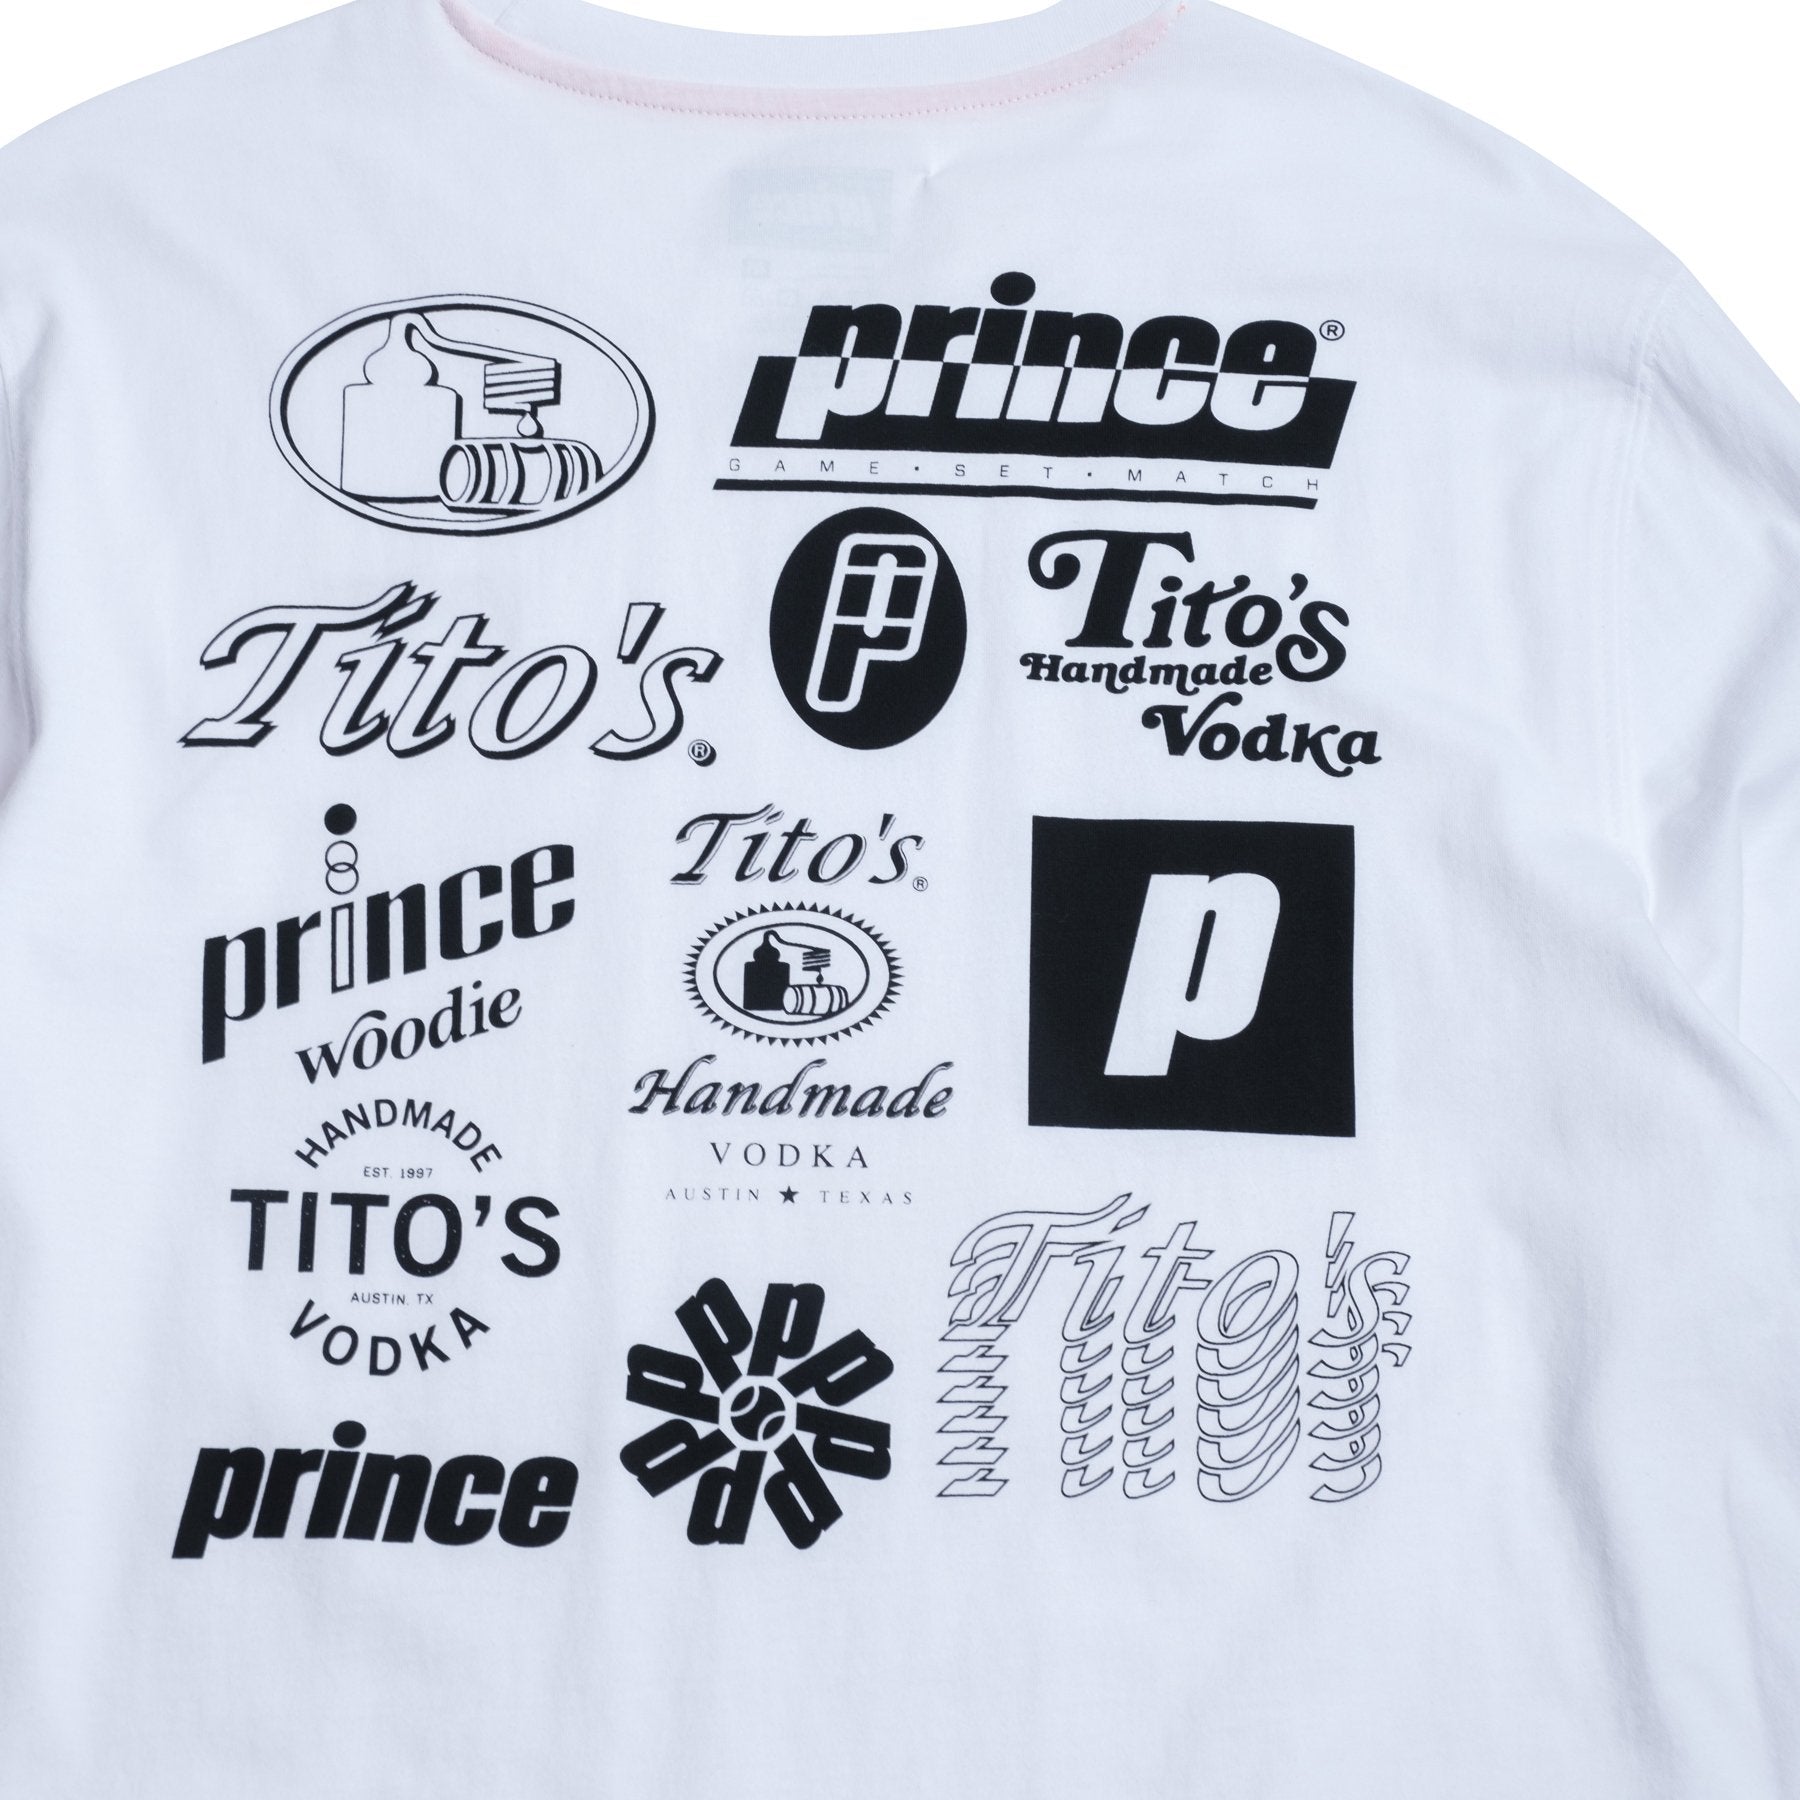 Back of white long sleeve with Prince and Tito's logos in black